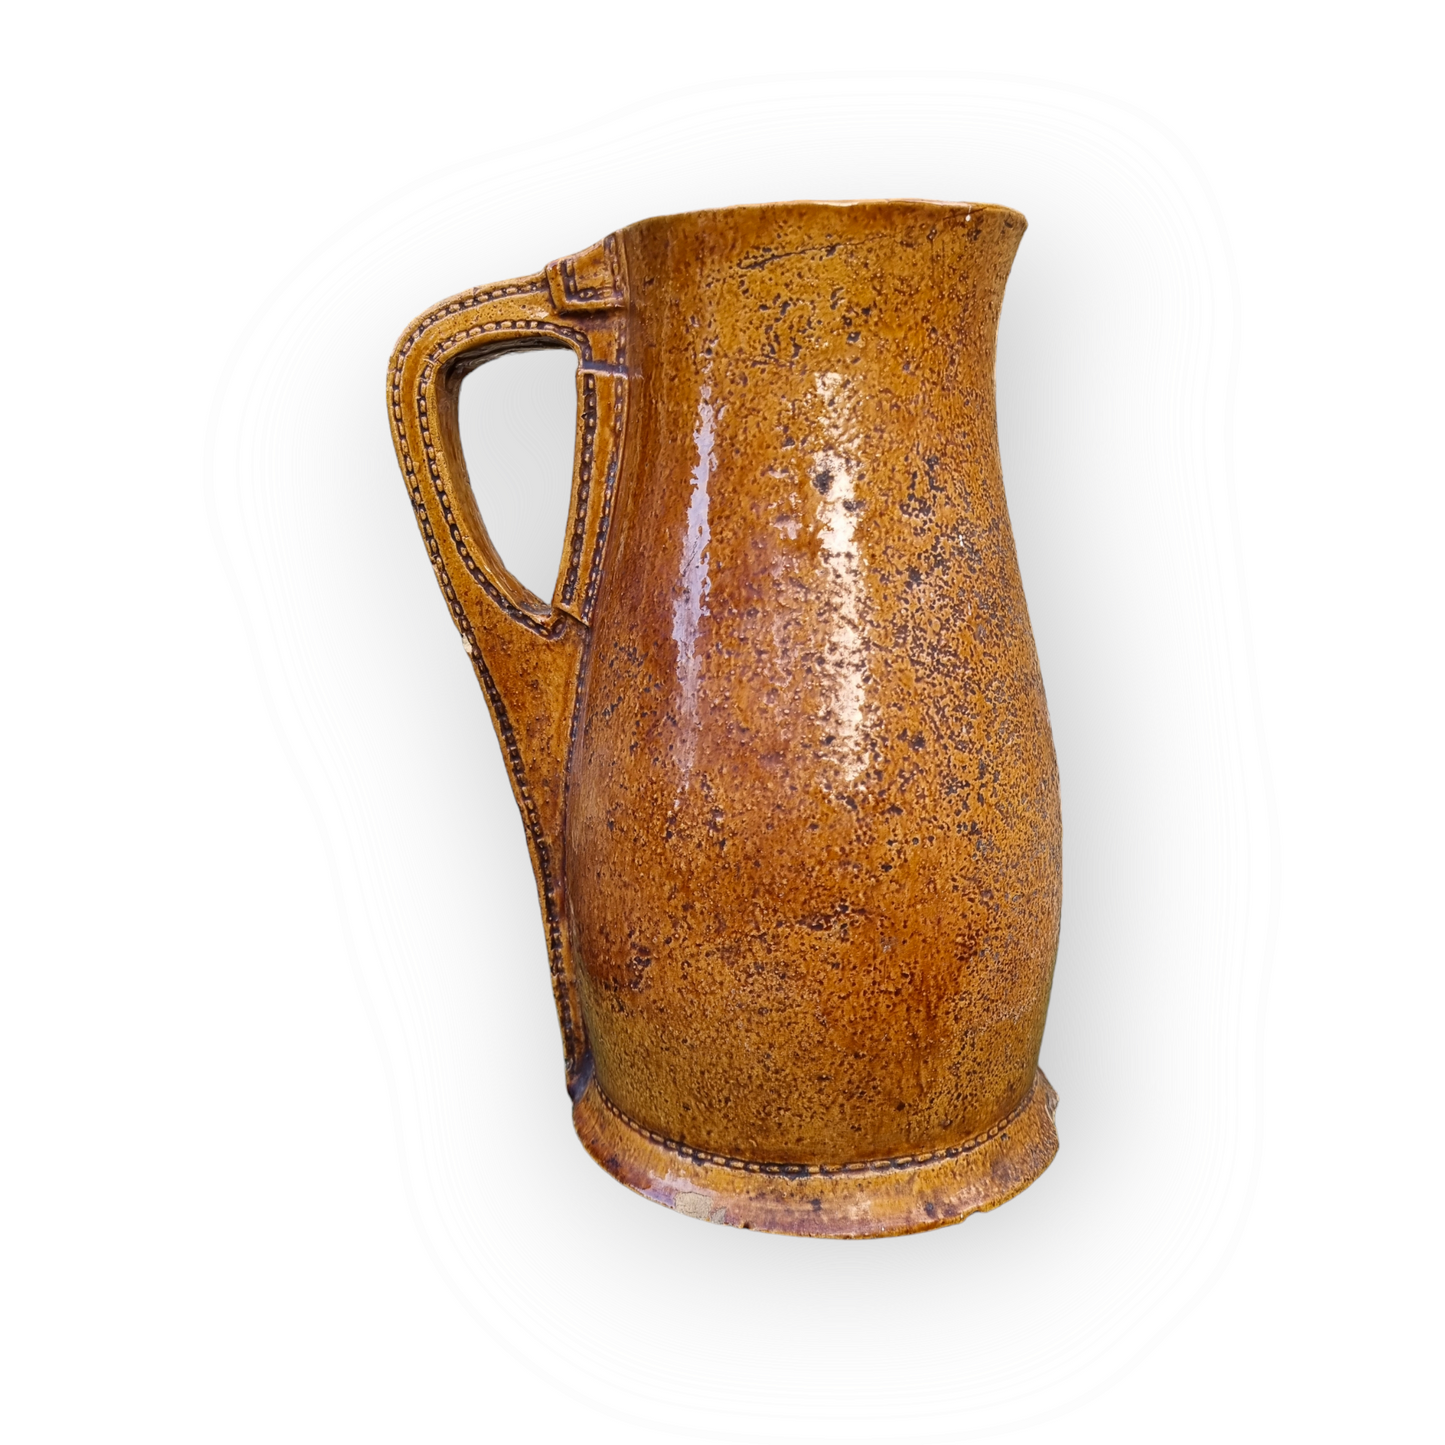 Large 19th Century English Antique Stoneware Jug / Pitcher in the Form of a Leather Bombard Impressed With The Stamp "MODEL OF THE ANCIENT LEATHER JACK OF ST CROSS WINCHESTER 1405".